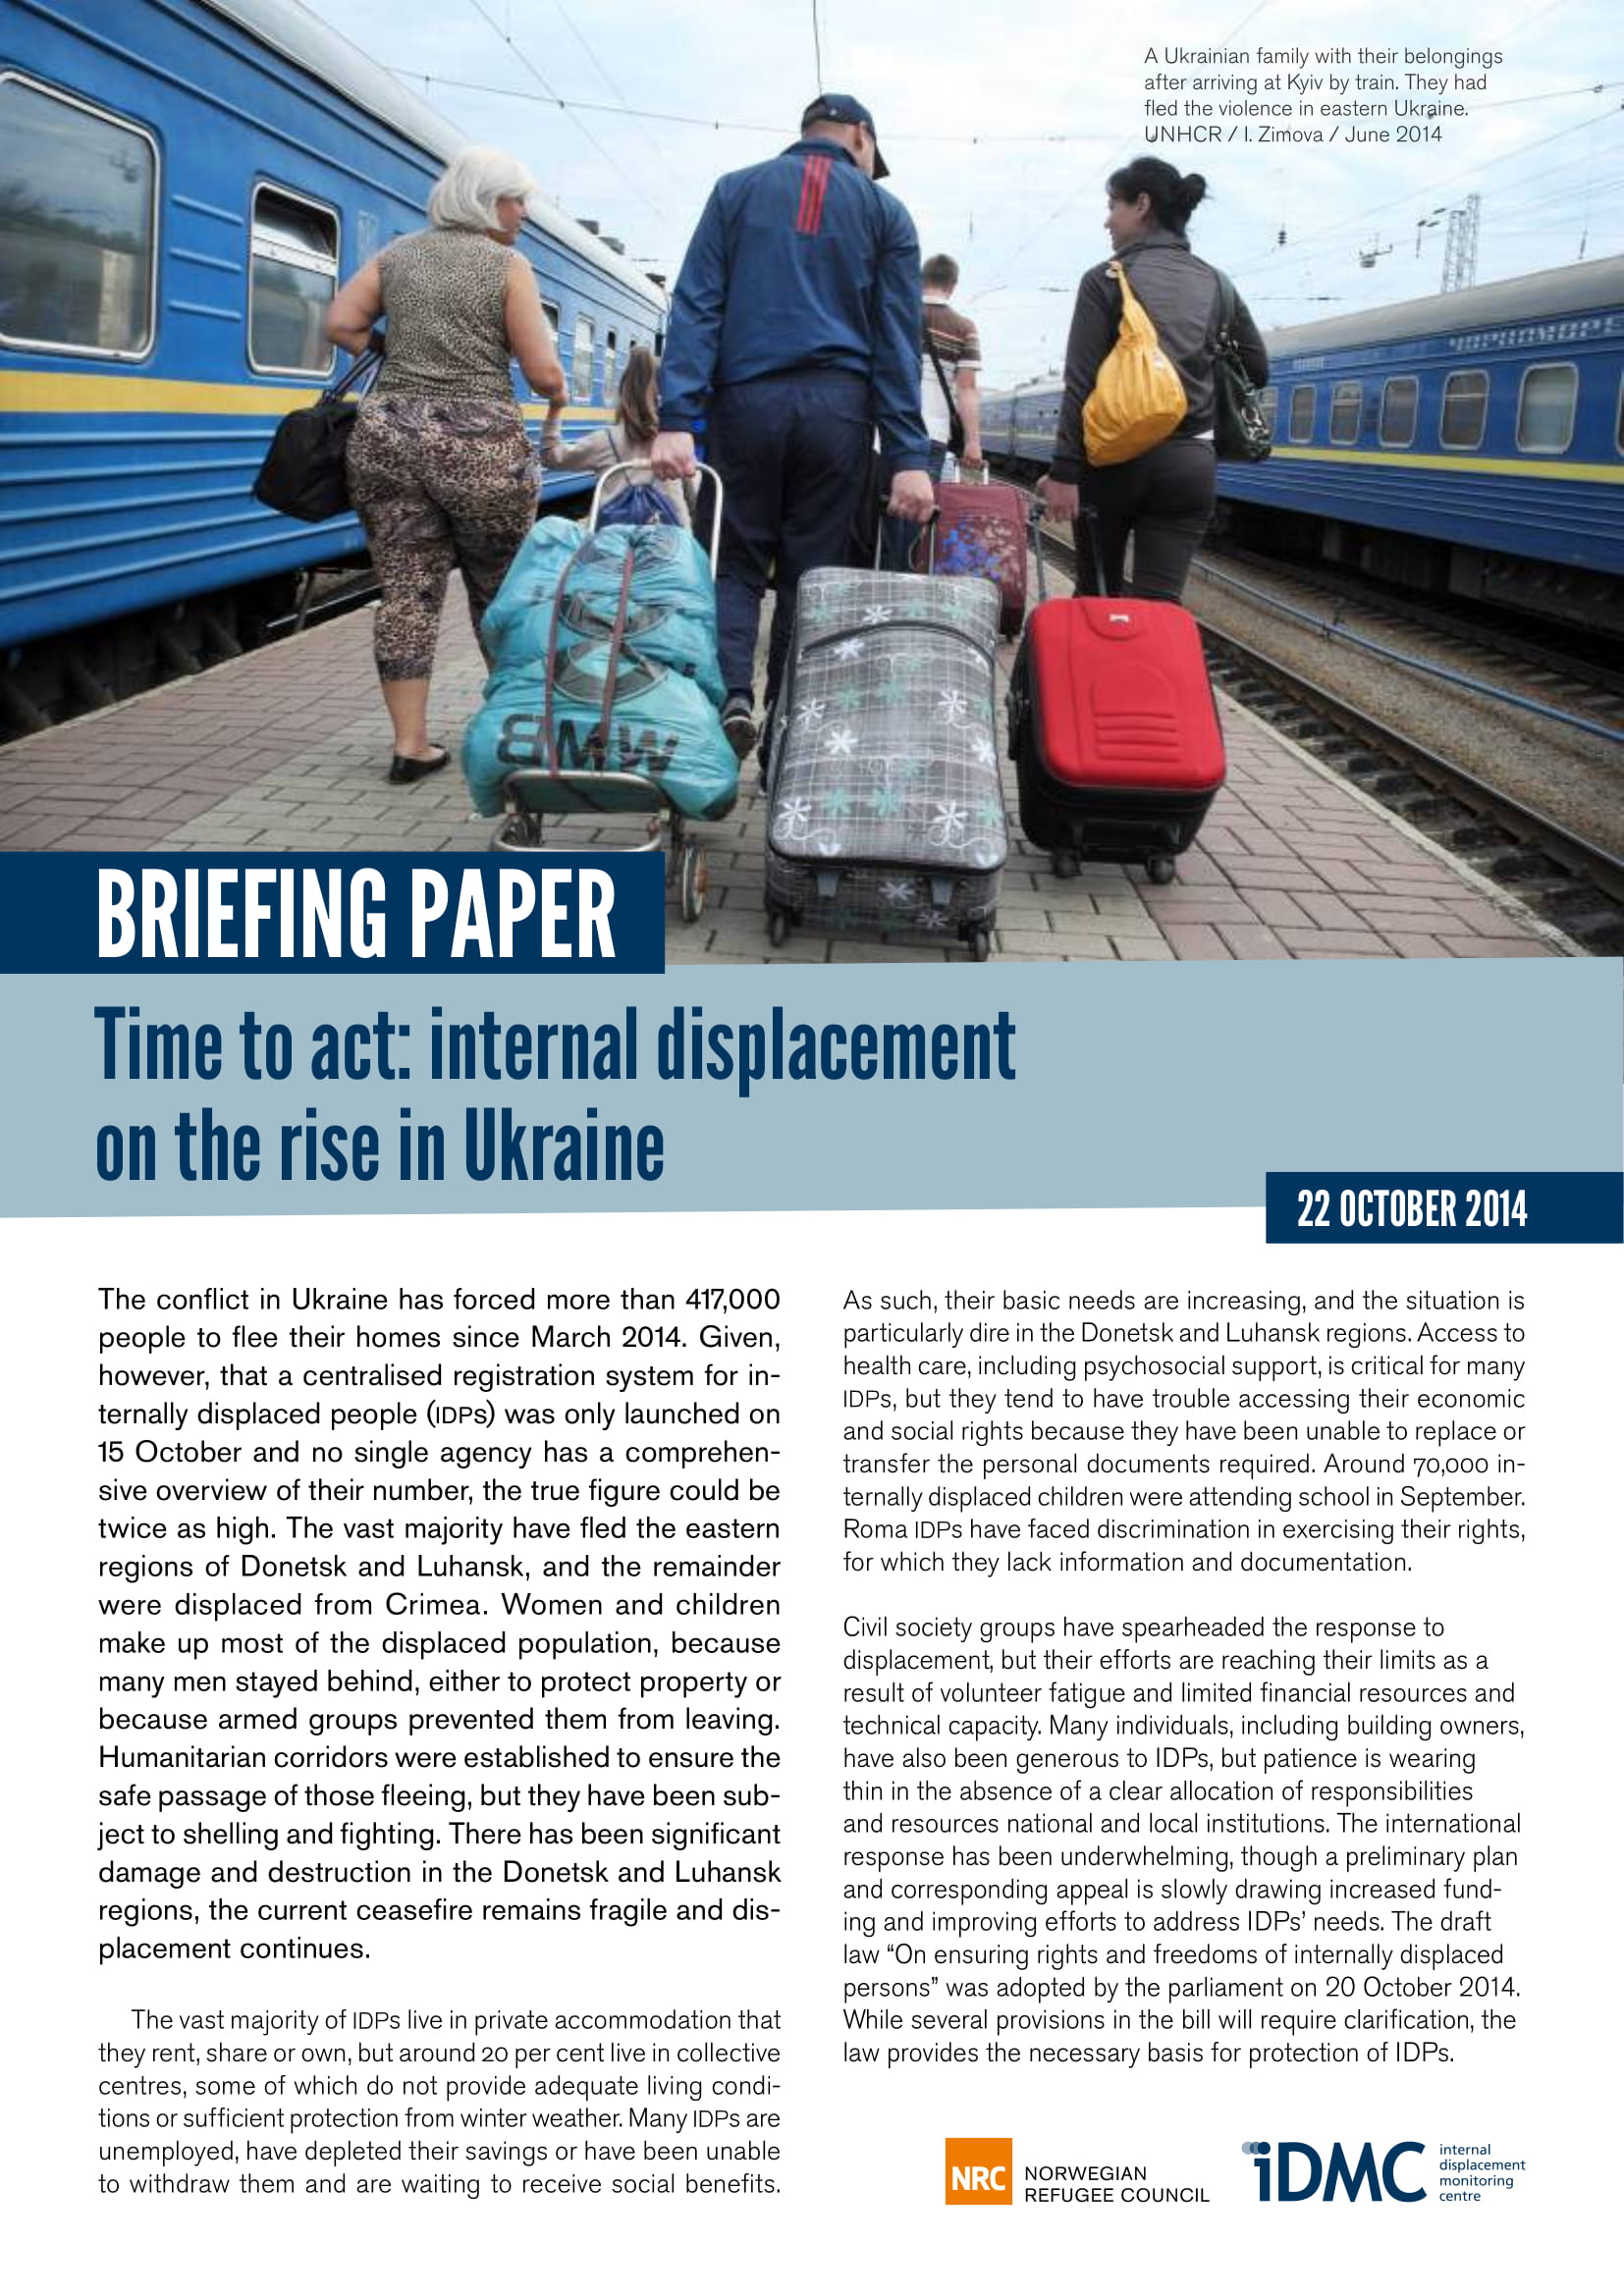 Time to act: internal displacement  on the rise in Ukraine